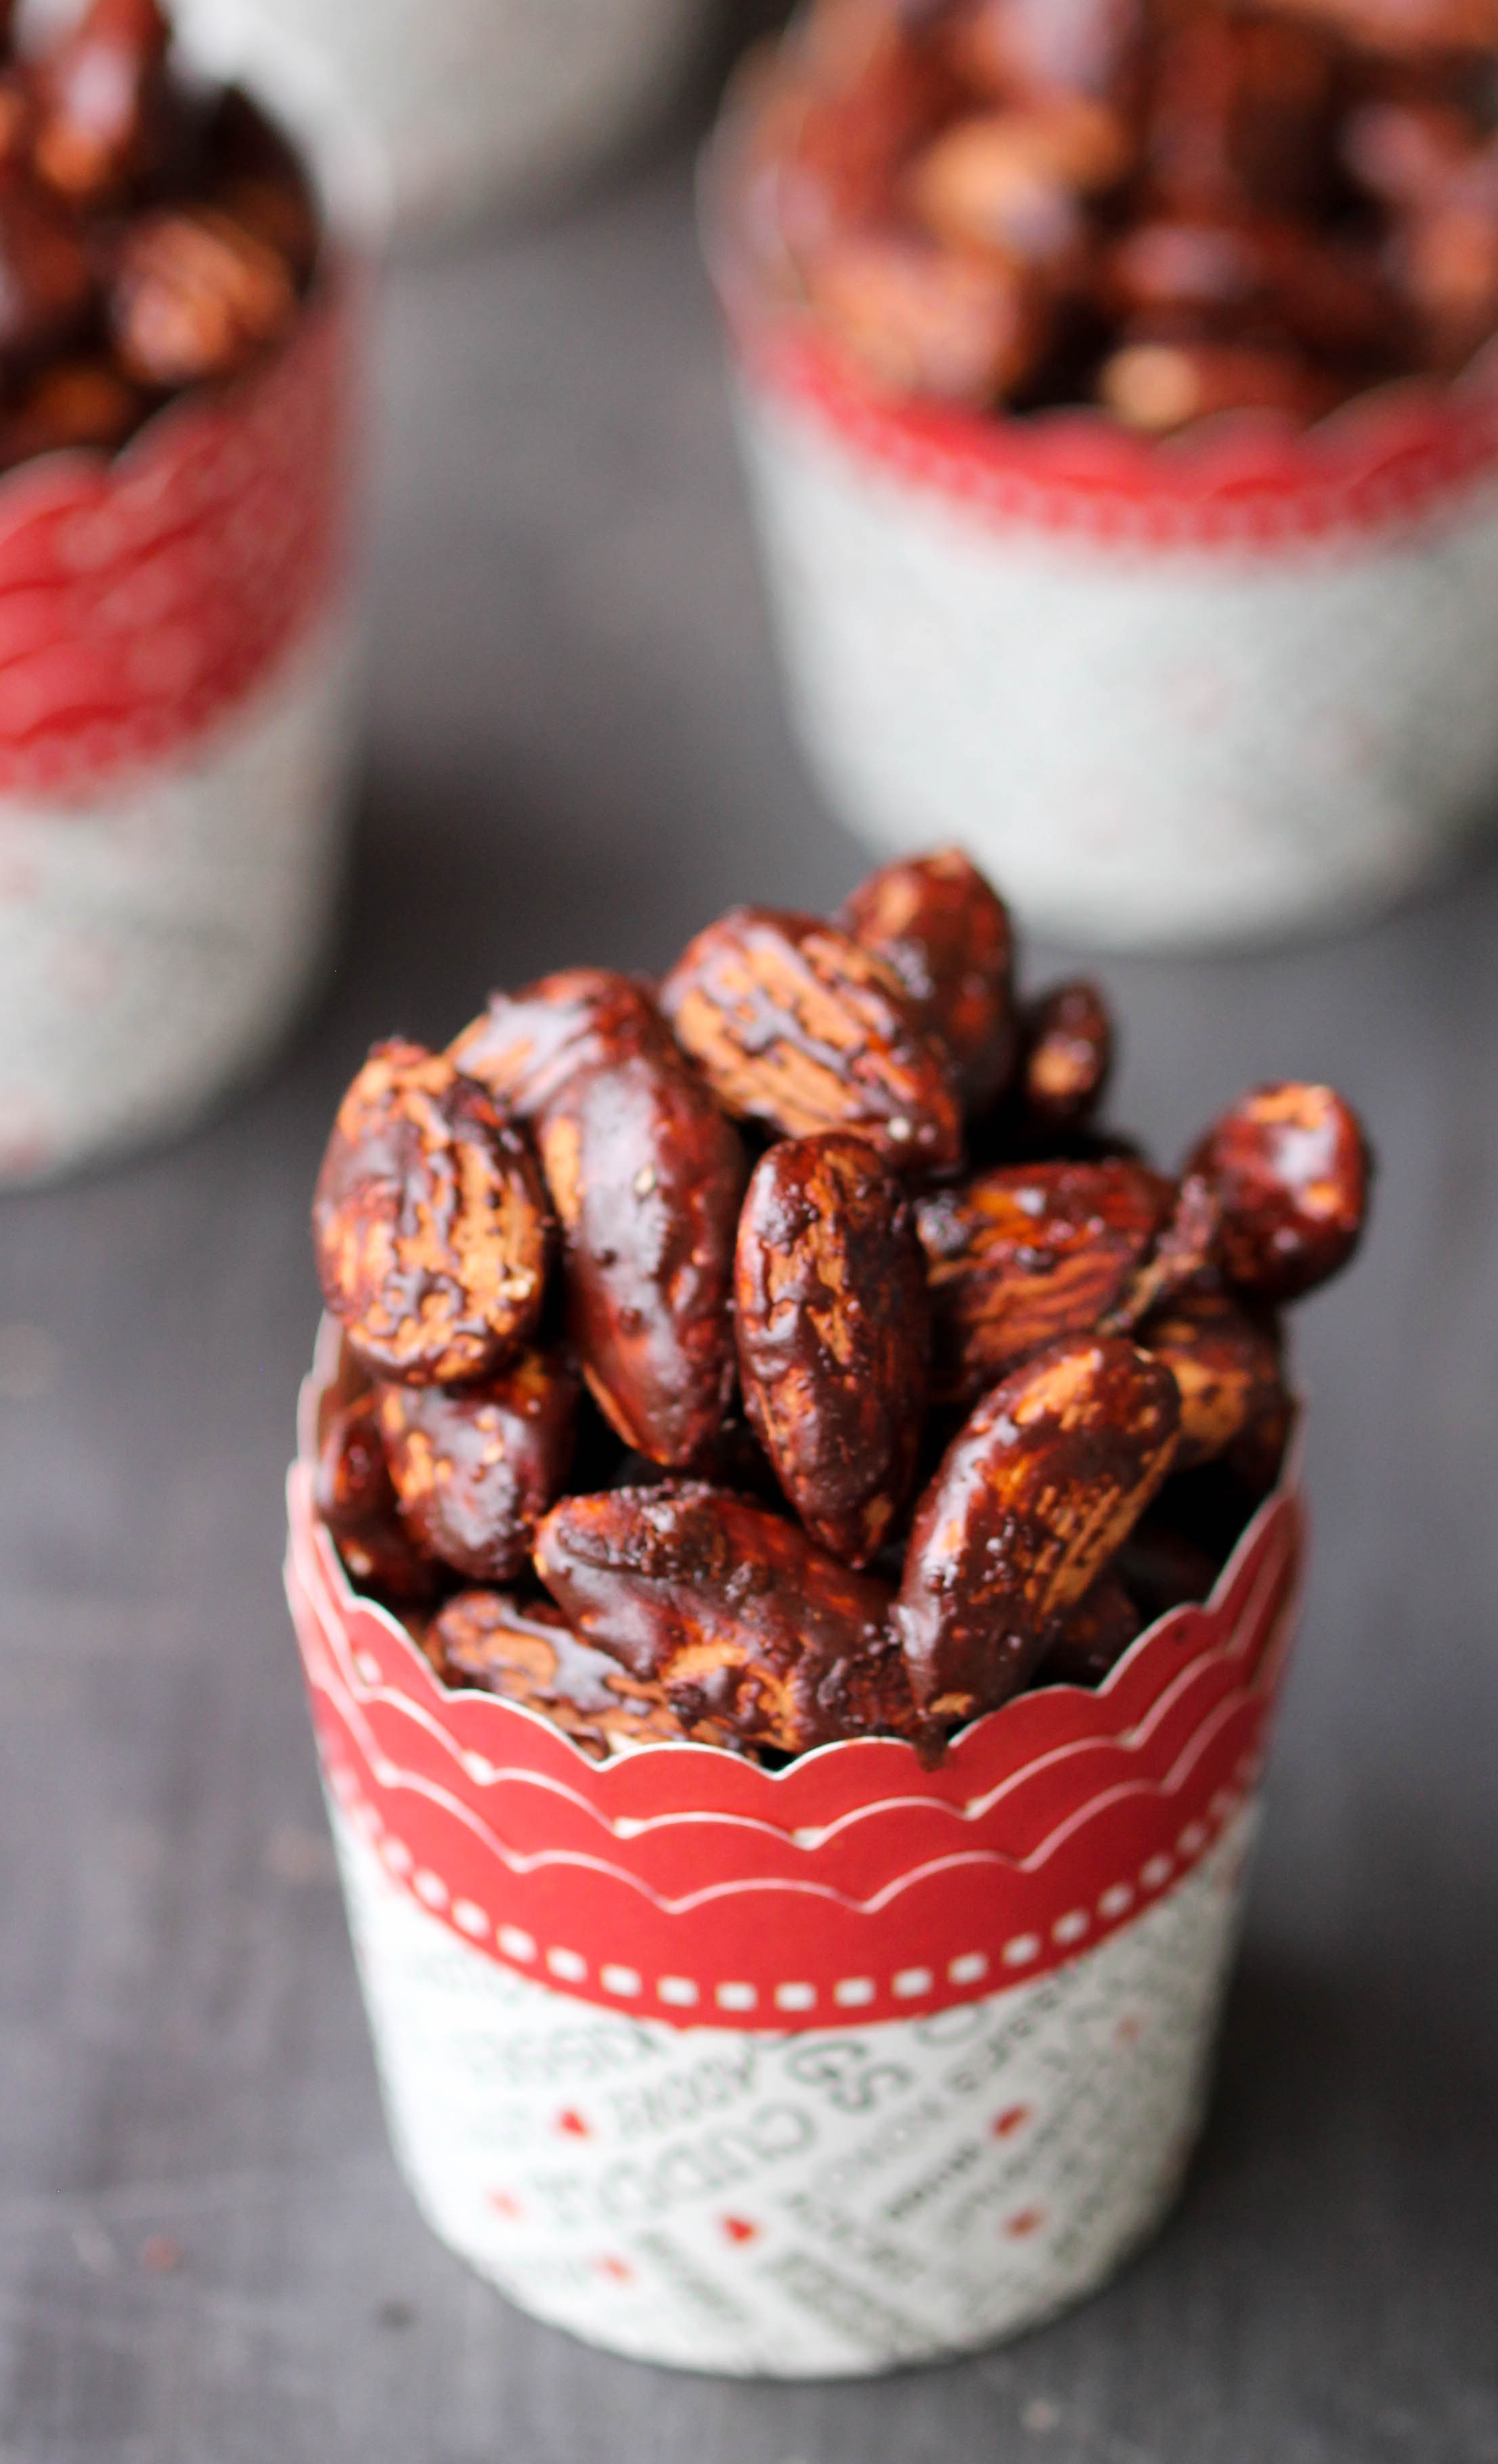 Roasted Almonds with Cocoa - just 3 ingredients, 15 minutes, one pan to make an easy, nutritious snack! Naturally vegan & gluten-free too.